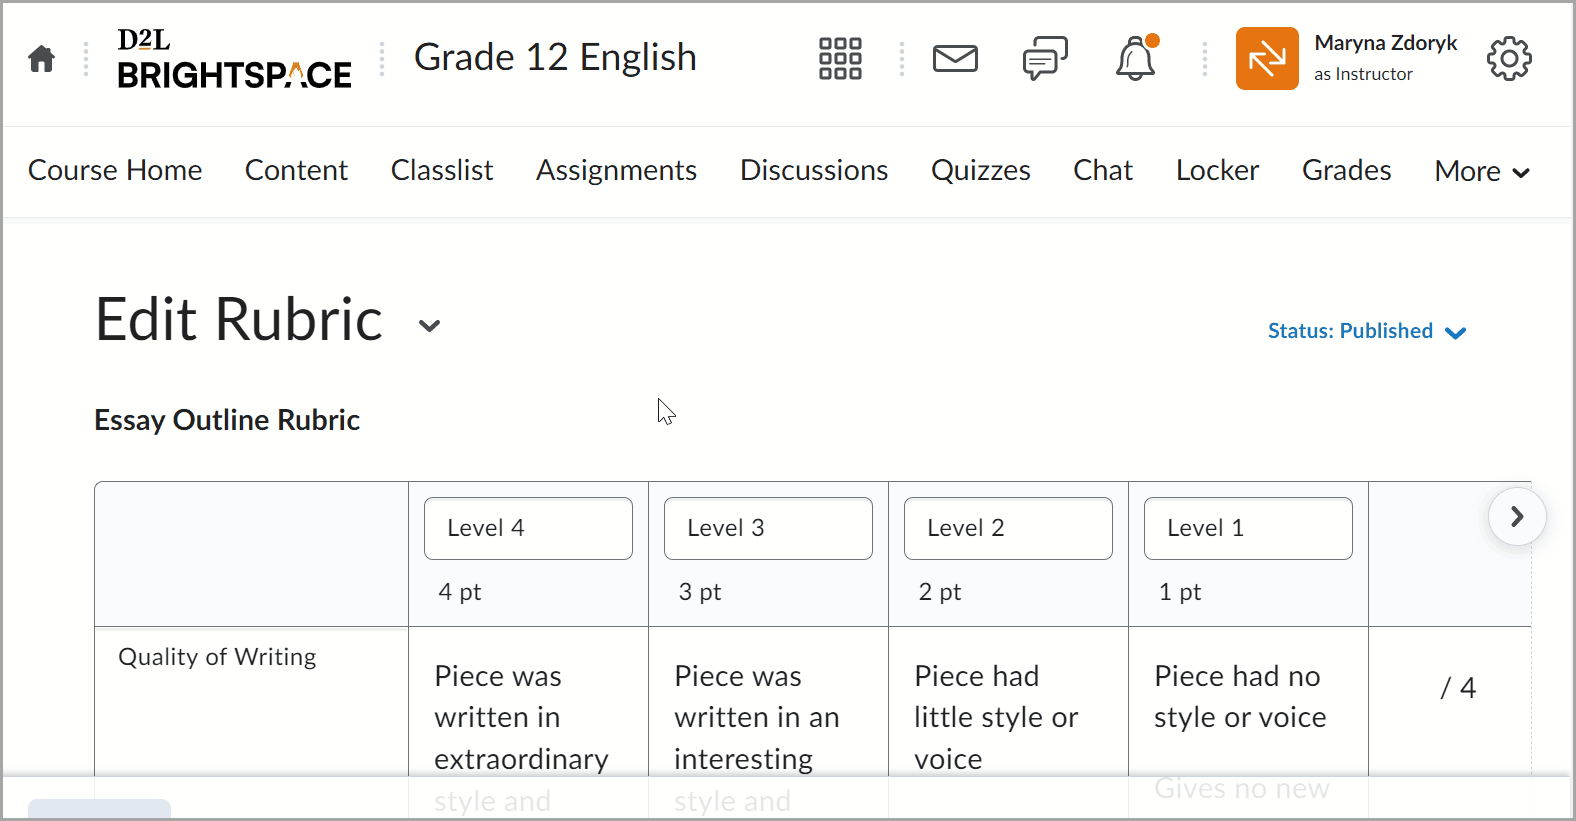 Animated GIF that shows that changes to rubrics now make that section of the rubric highlight in blue until changes are saved